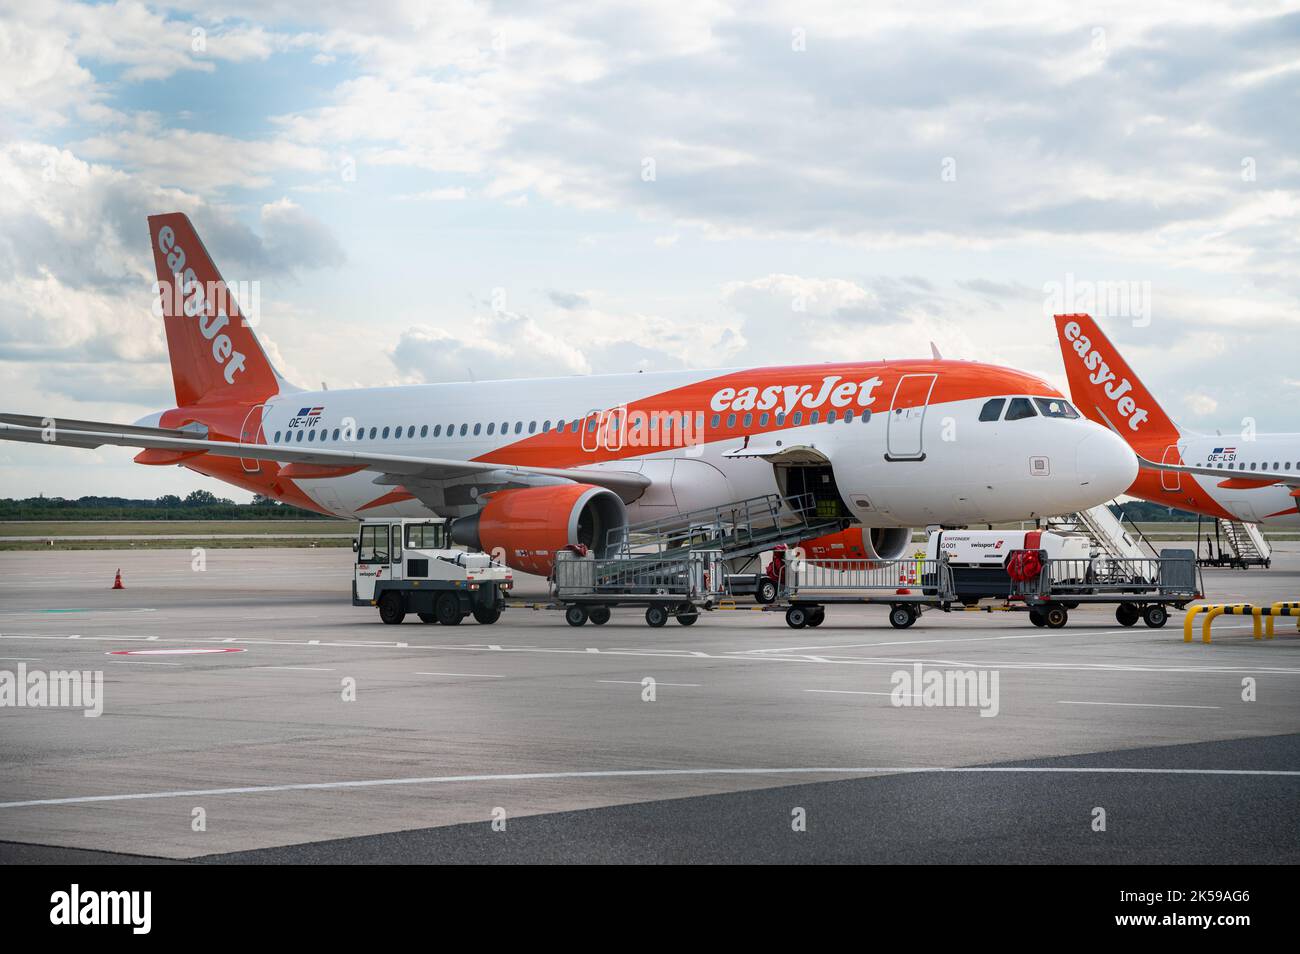 30.08.2022, Germany, Berlin - An Airbus A320-200 passenger aircraft of EasyJet Europe with the registration OE-IVF is parked on the apron at Berlin Br Stock Photo